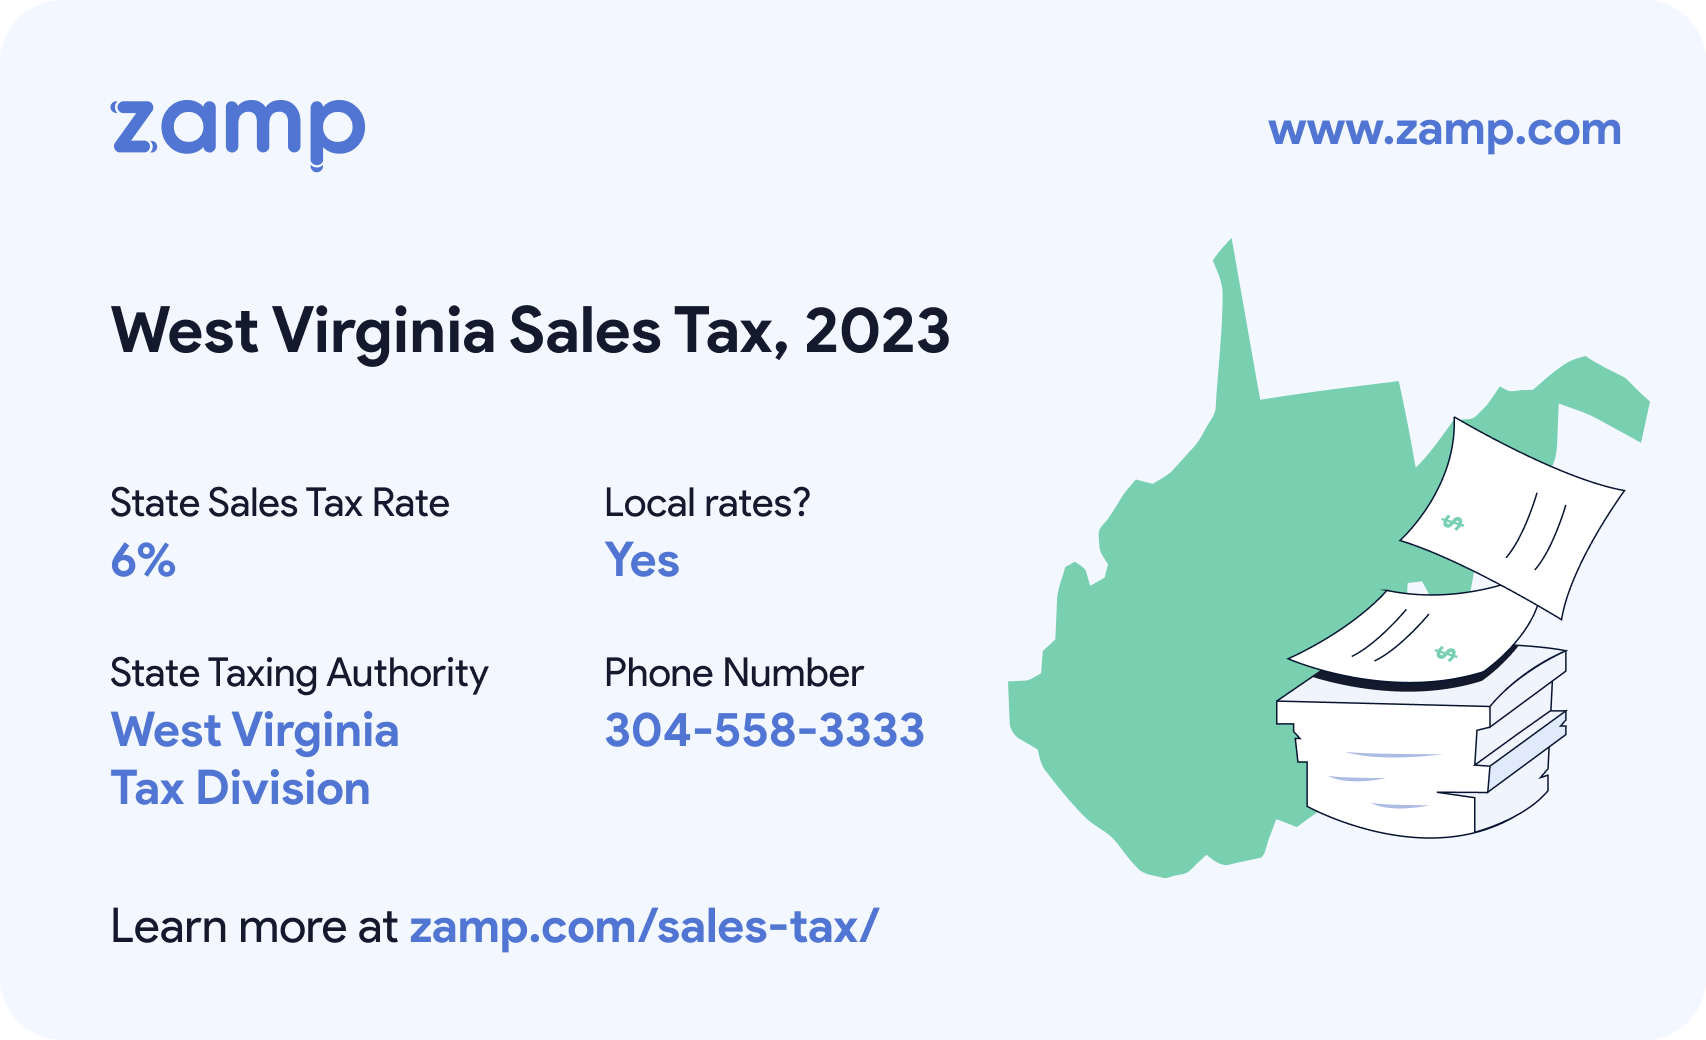 West Virginia basic sales tax info for 2023 - State sales tax rate: 4%, Local rates? Yes; State Taxing Authority: West Virginia Tax Division; and phone number 307-777-5200